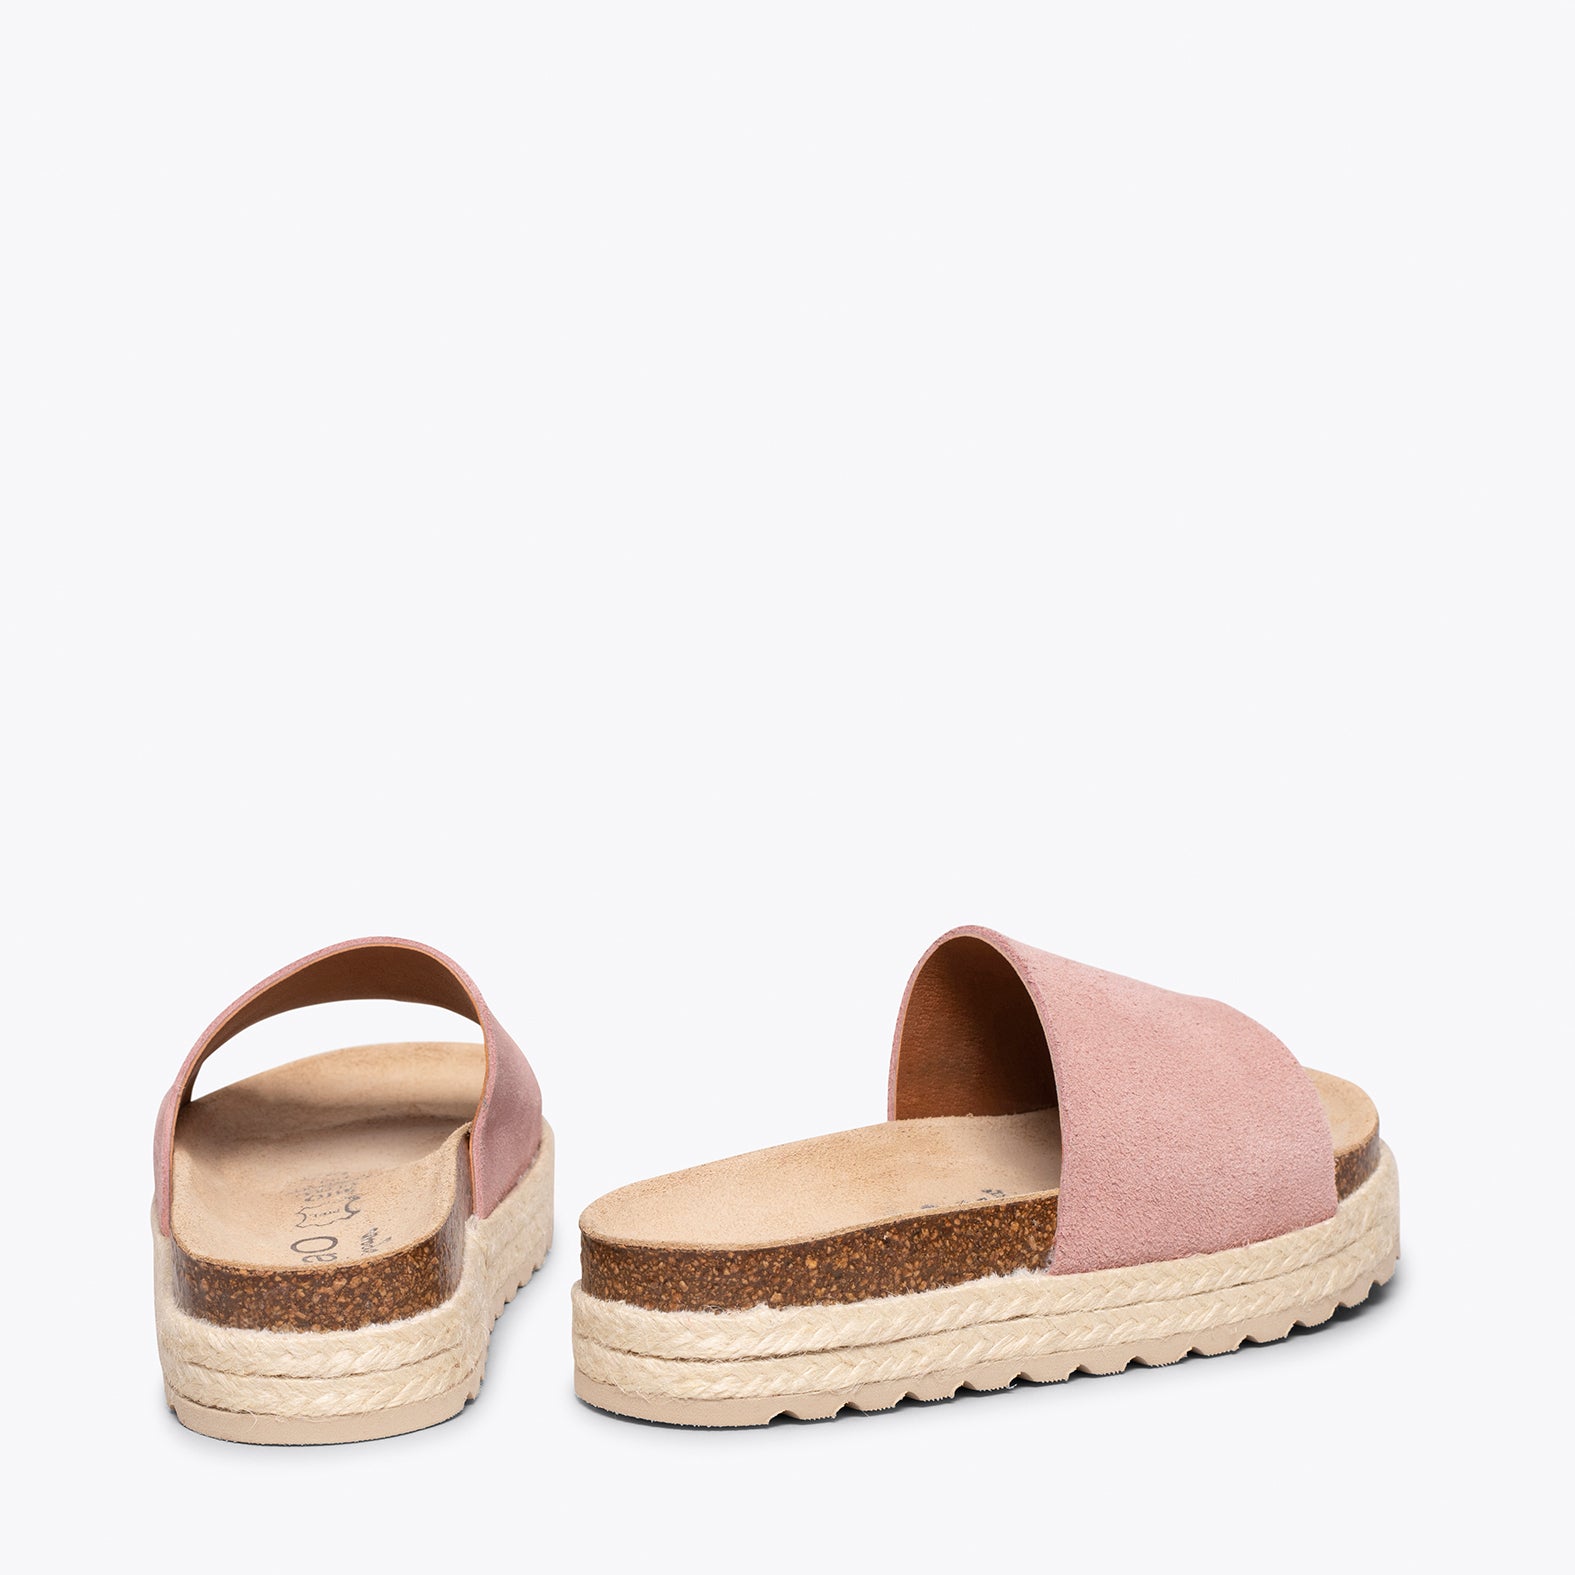 STRAWBERRY – PINK flat sandals for girls